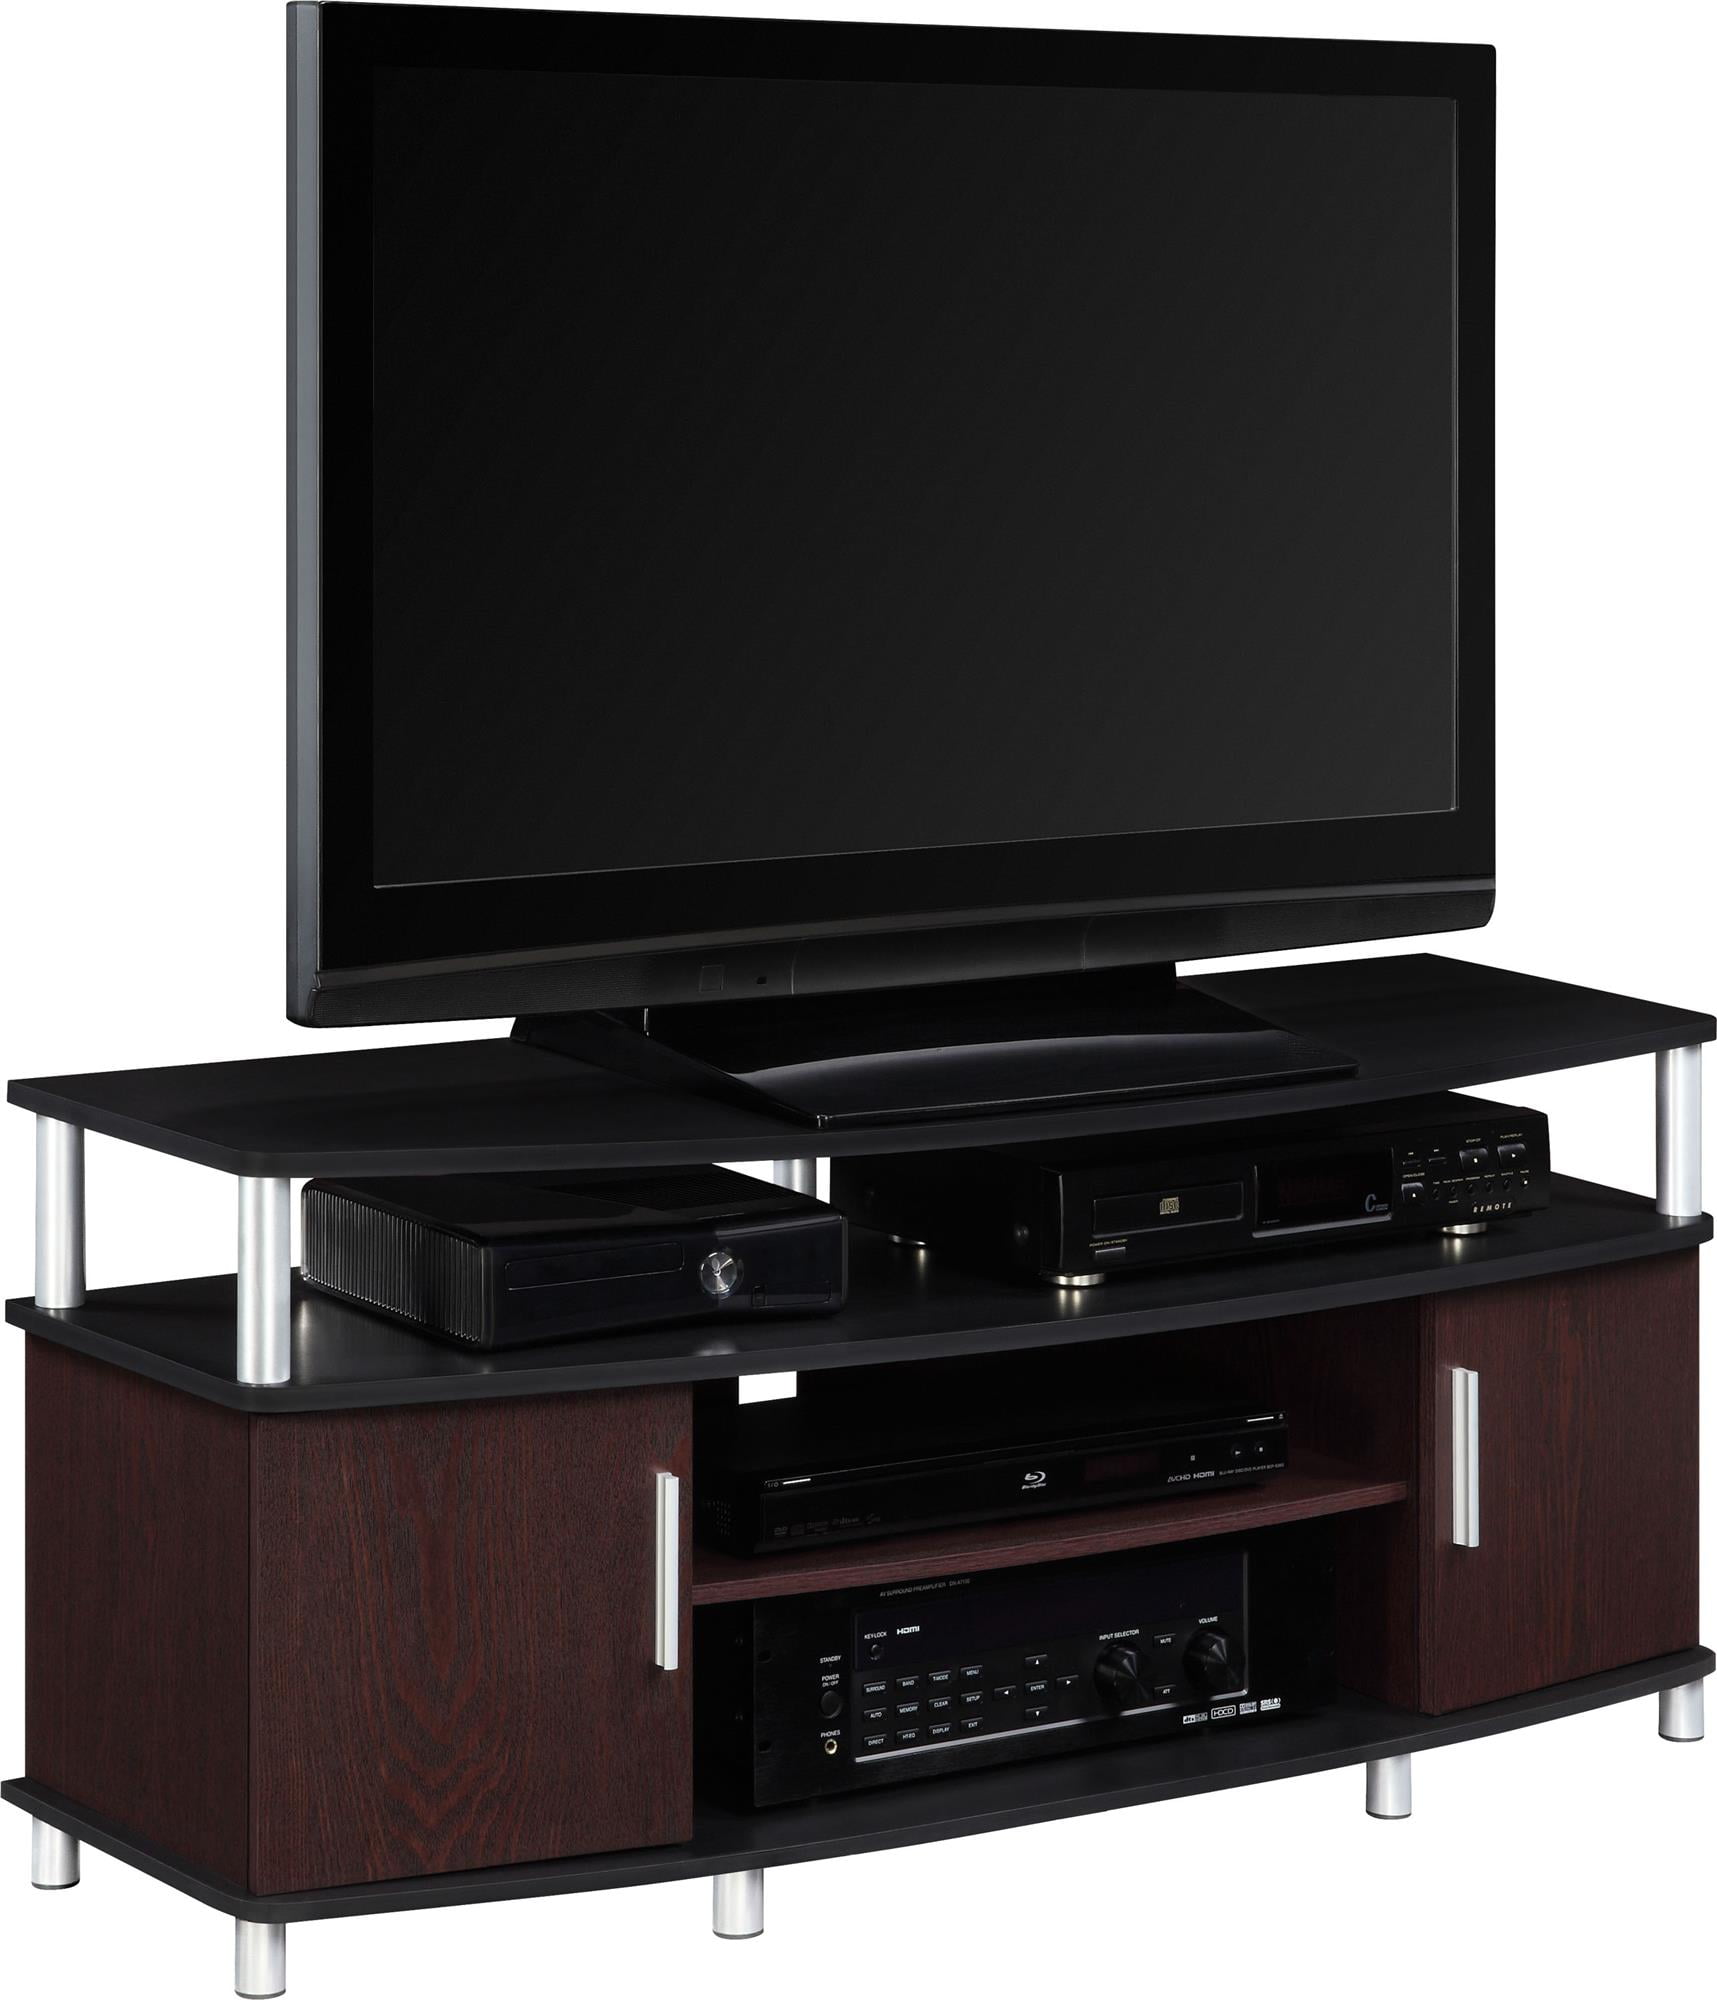 Carson TV Stand for TVs up to 50", Cherry - image 4 of 12